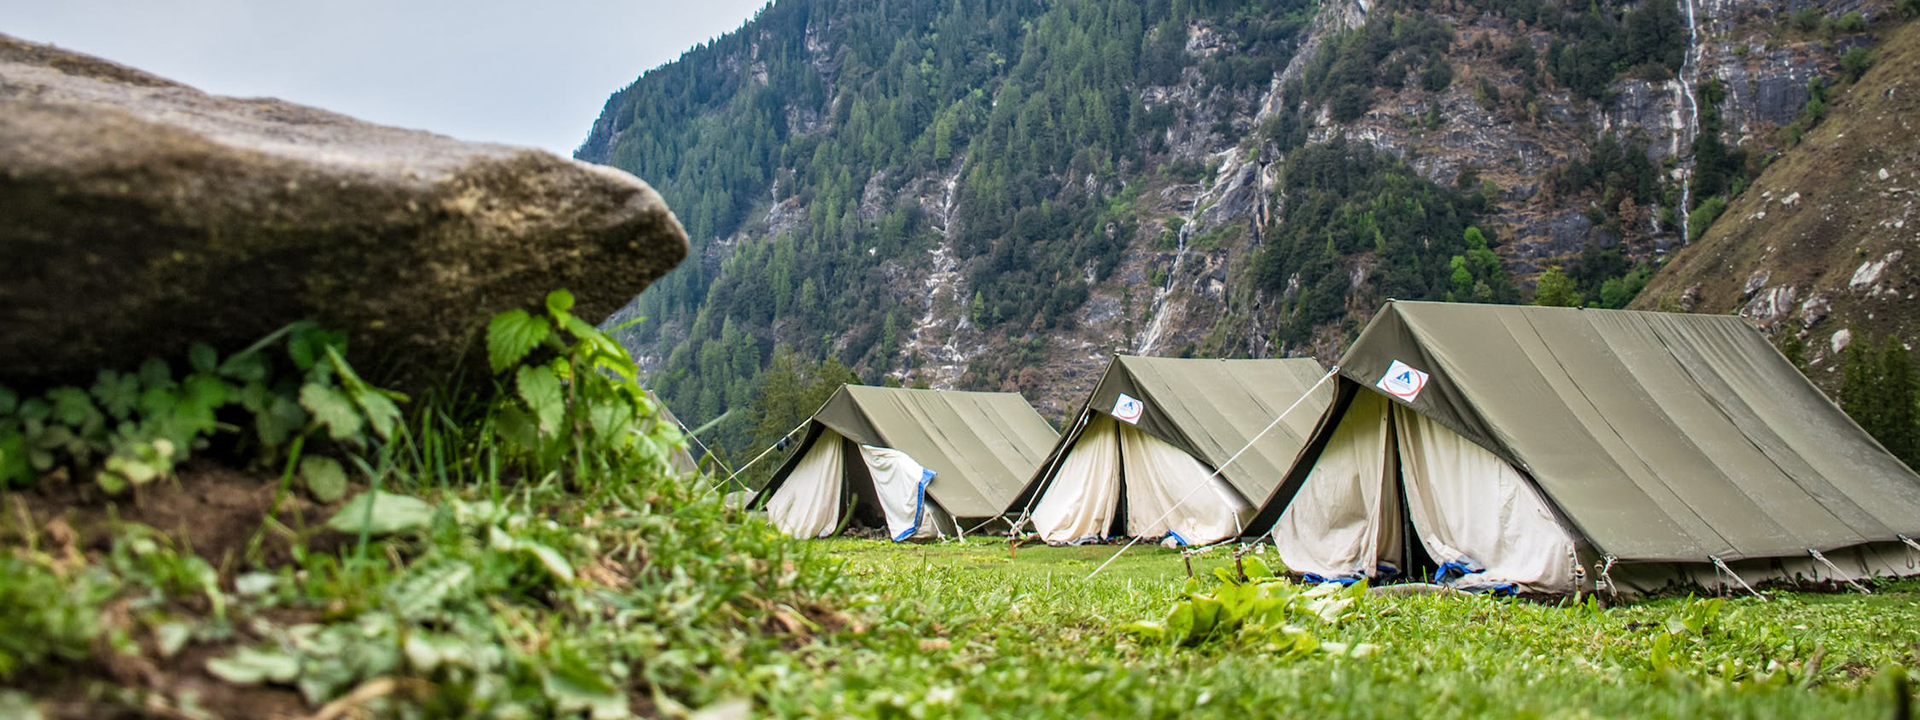 A-Frame Tents